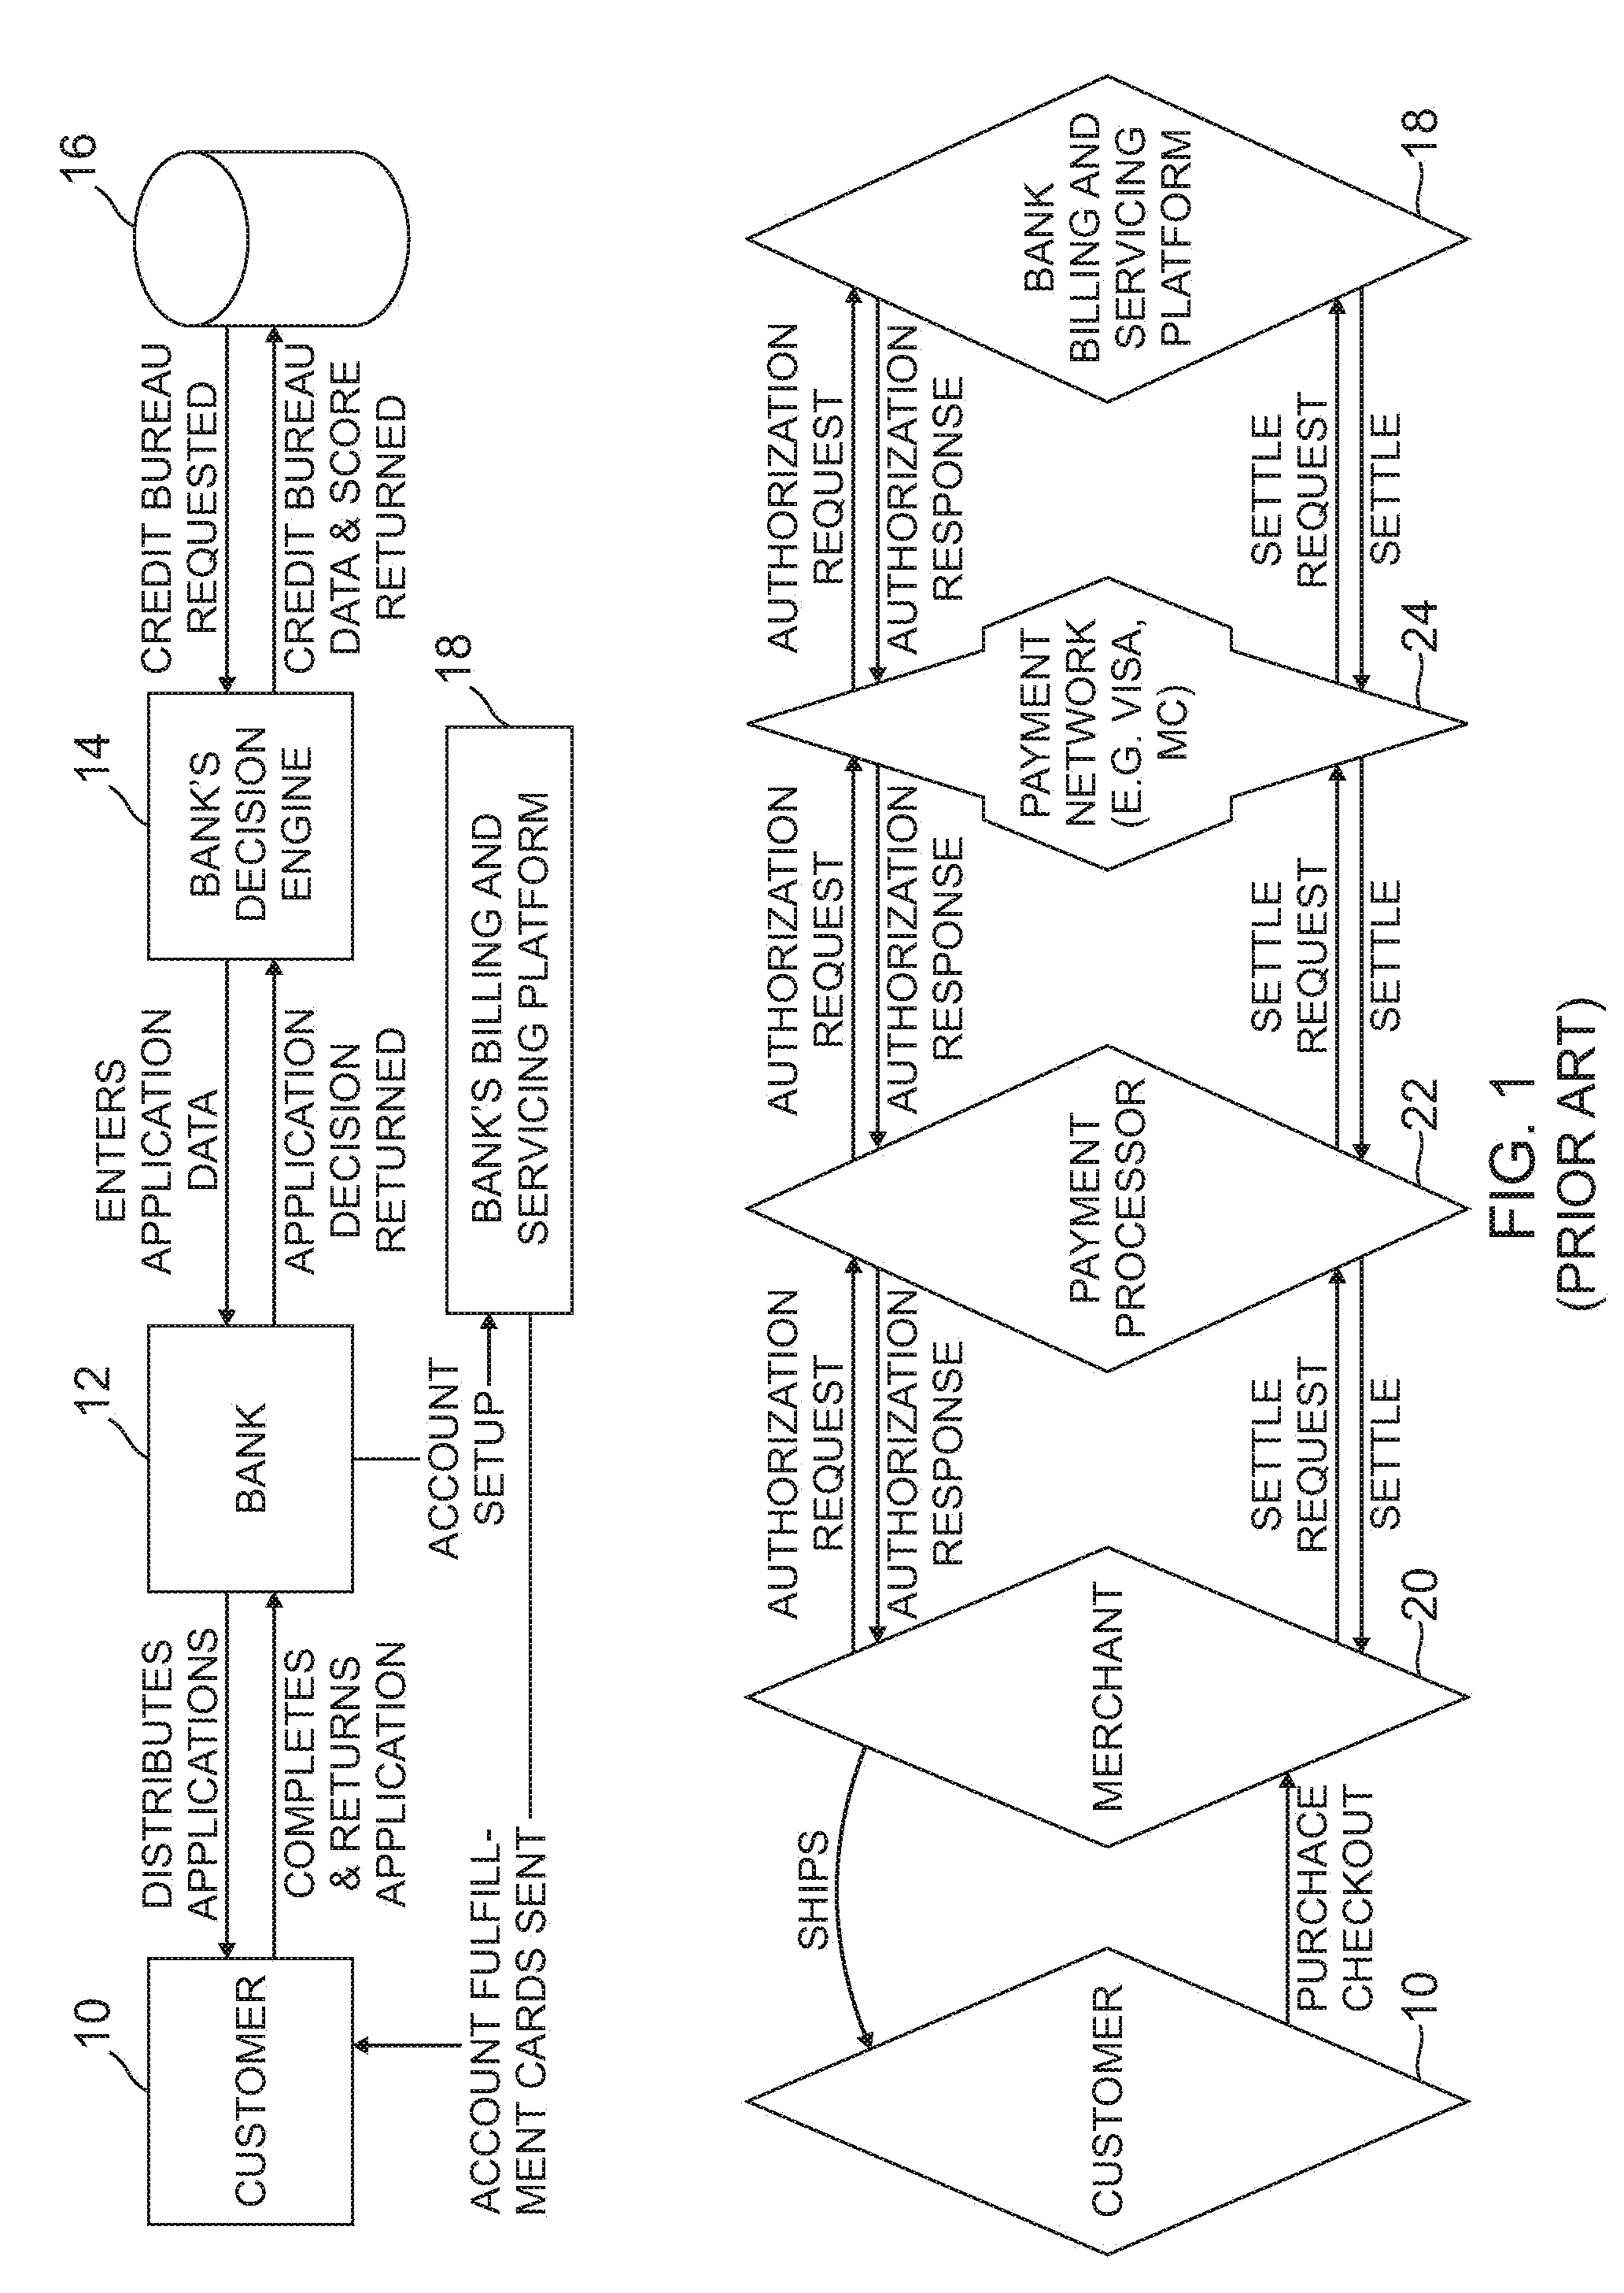 Method and system for completing a transaction between a customer and a merchant